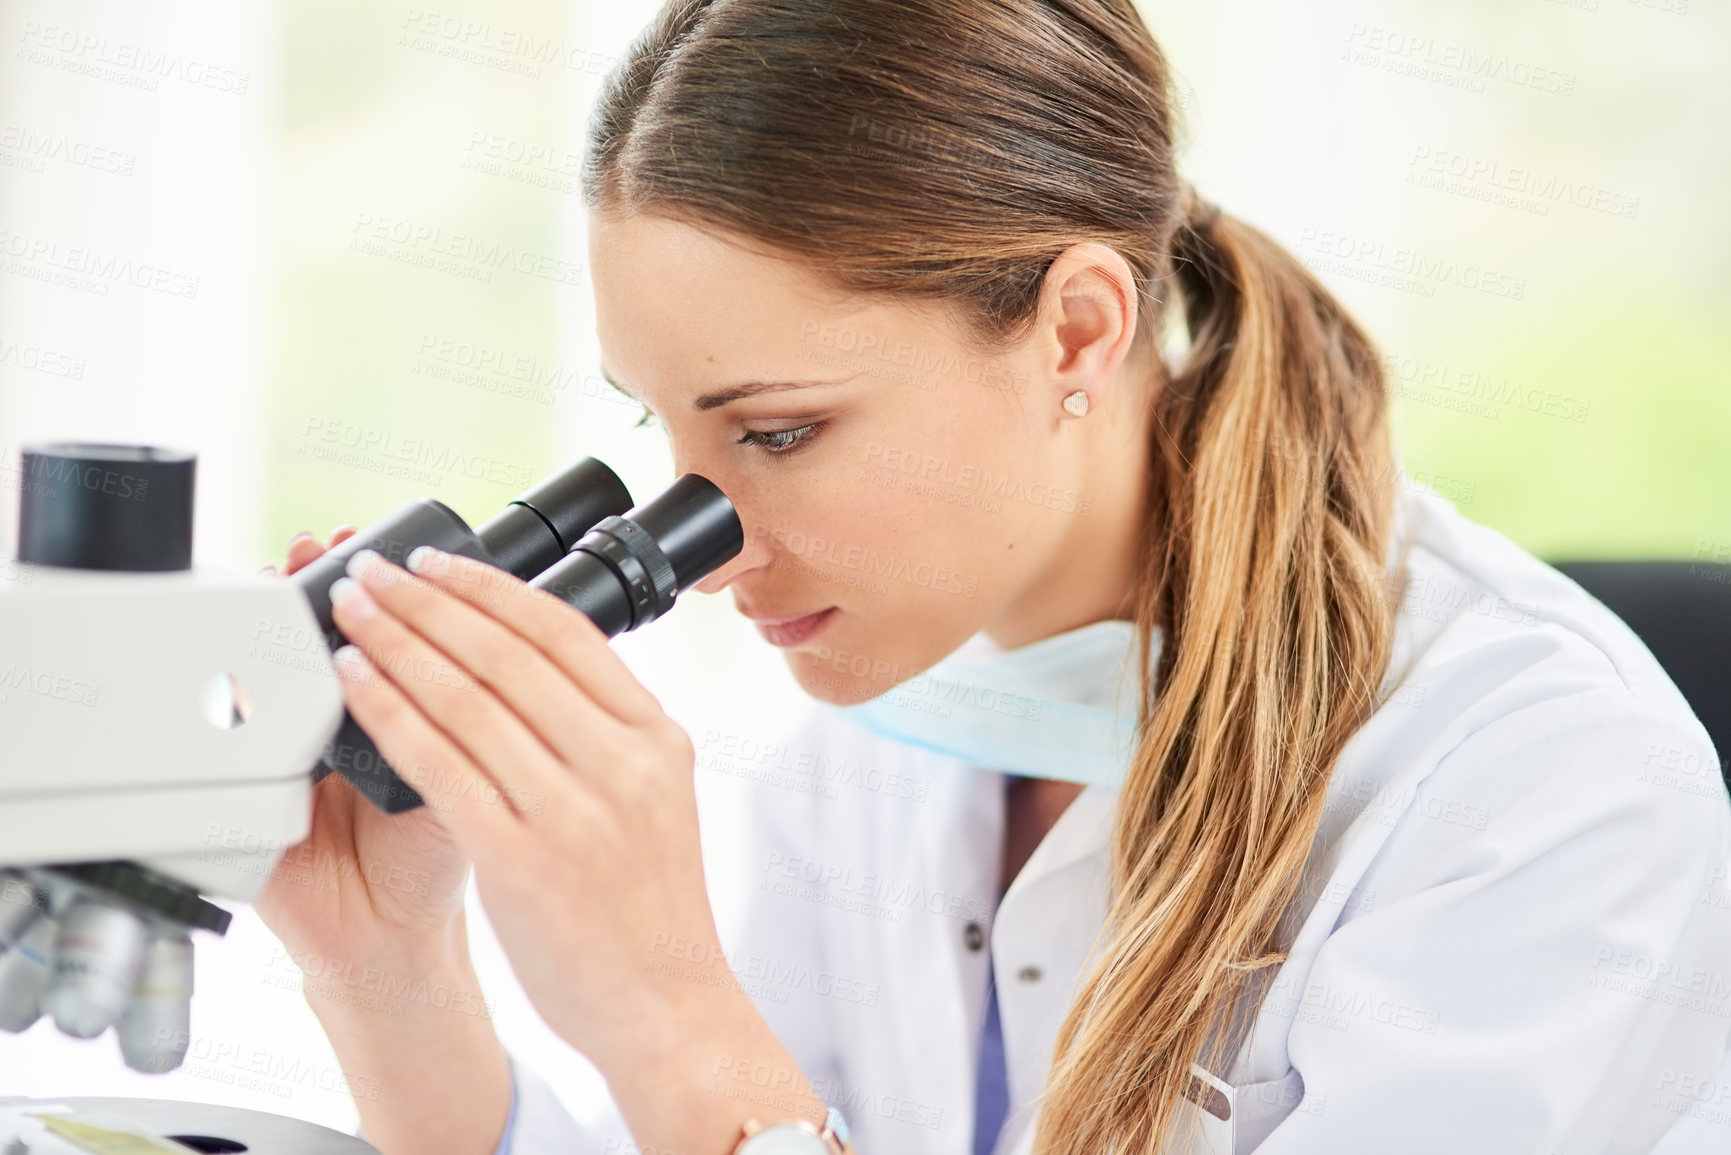 Buy stock photo Cropped shot of a young female scientist working in a lab